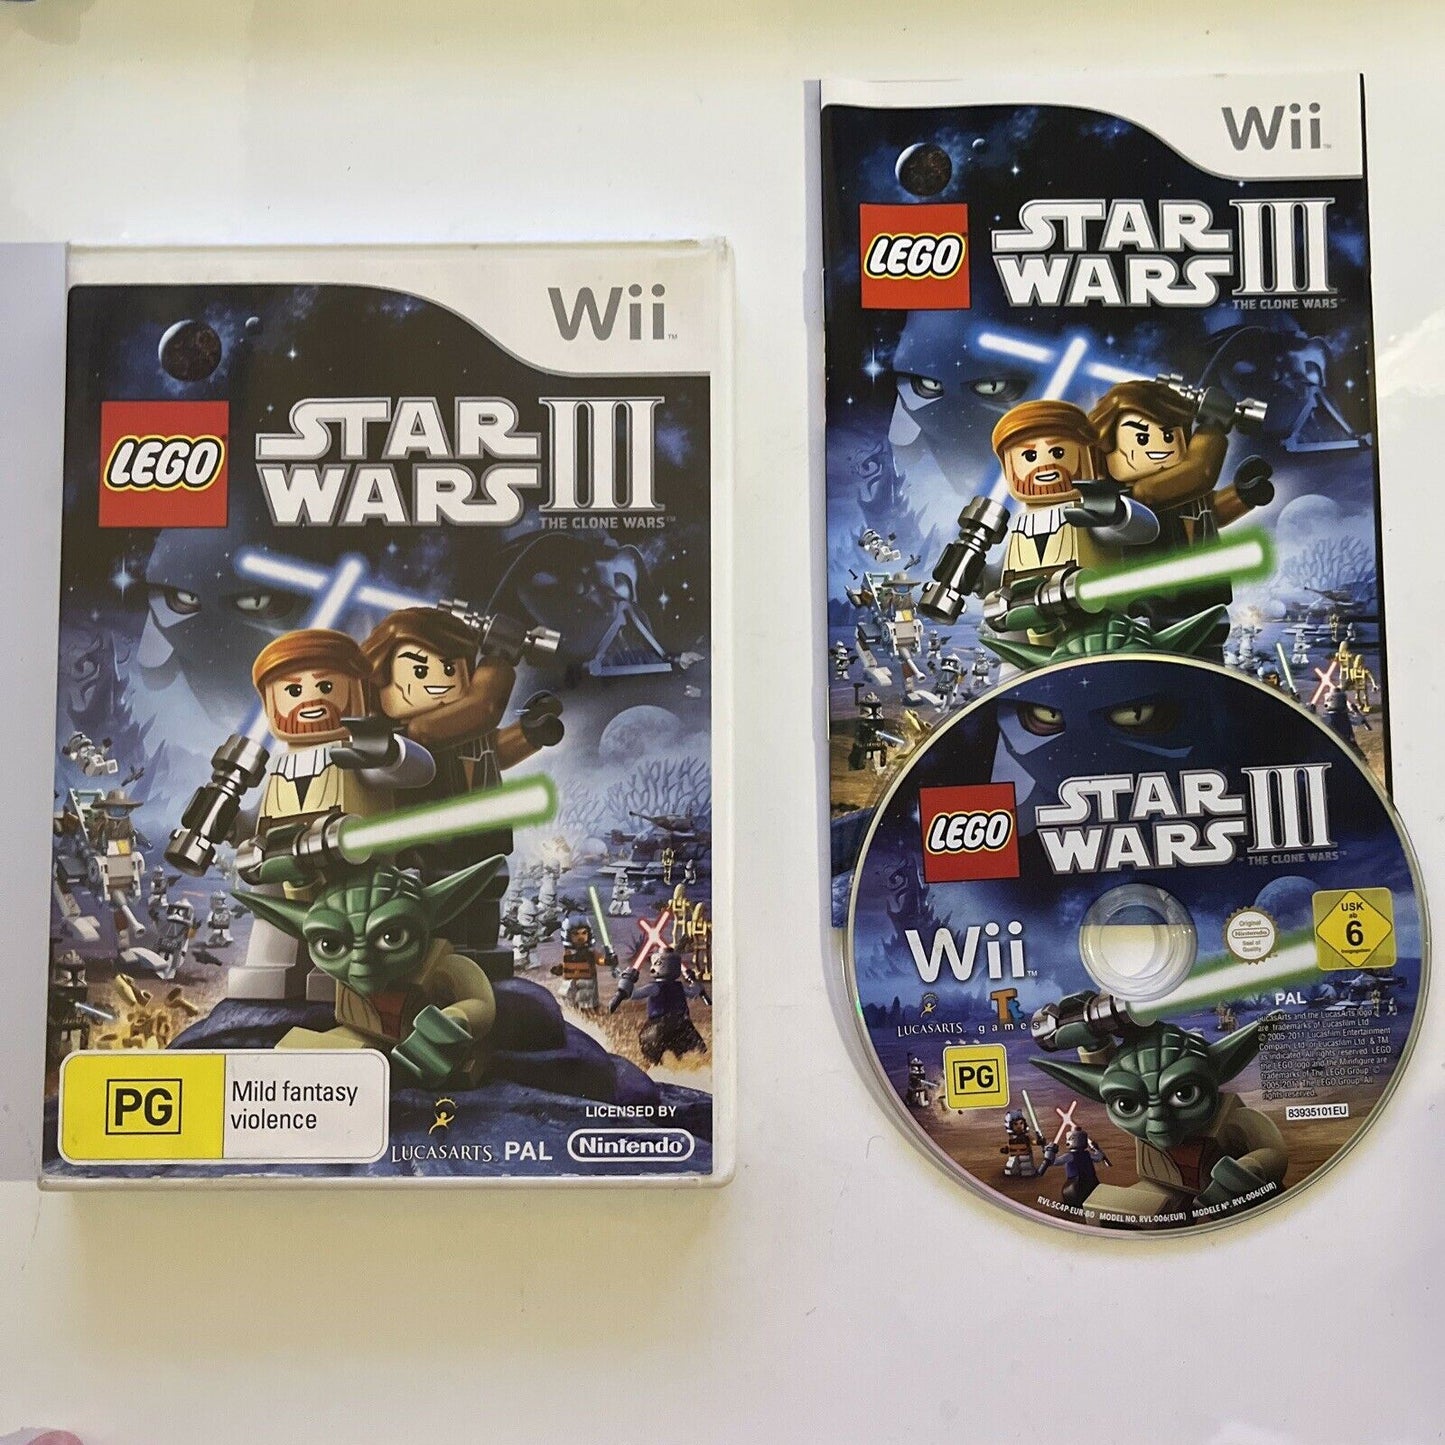 LEGO Star Wars 3: The Clone Wars - Nintendo Wii PAL Game Complete With Manual